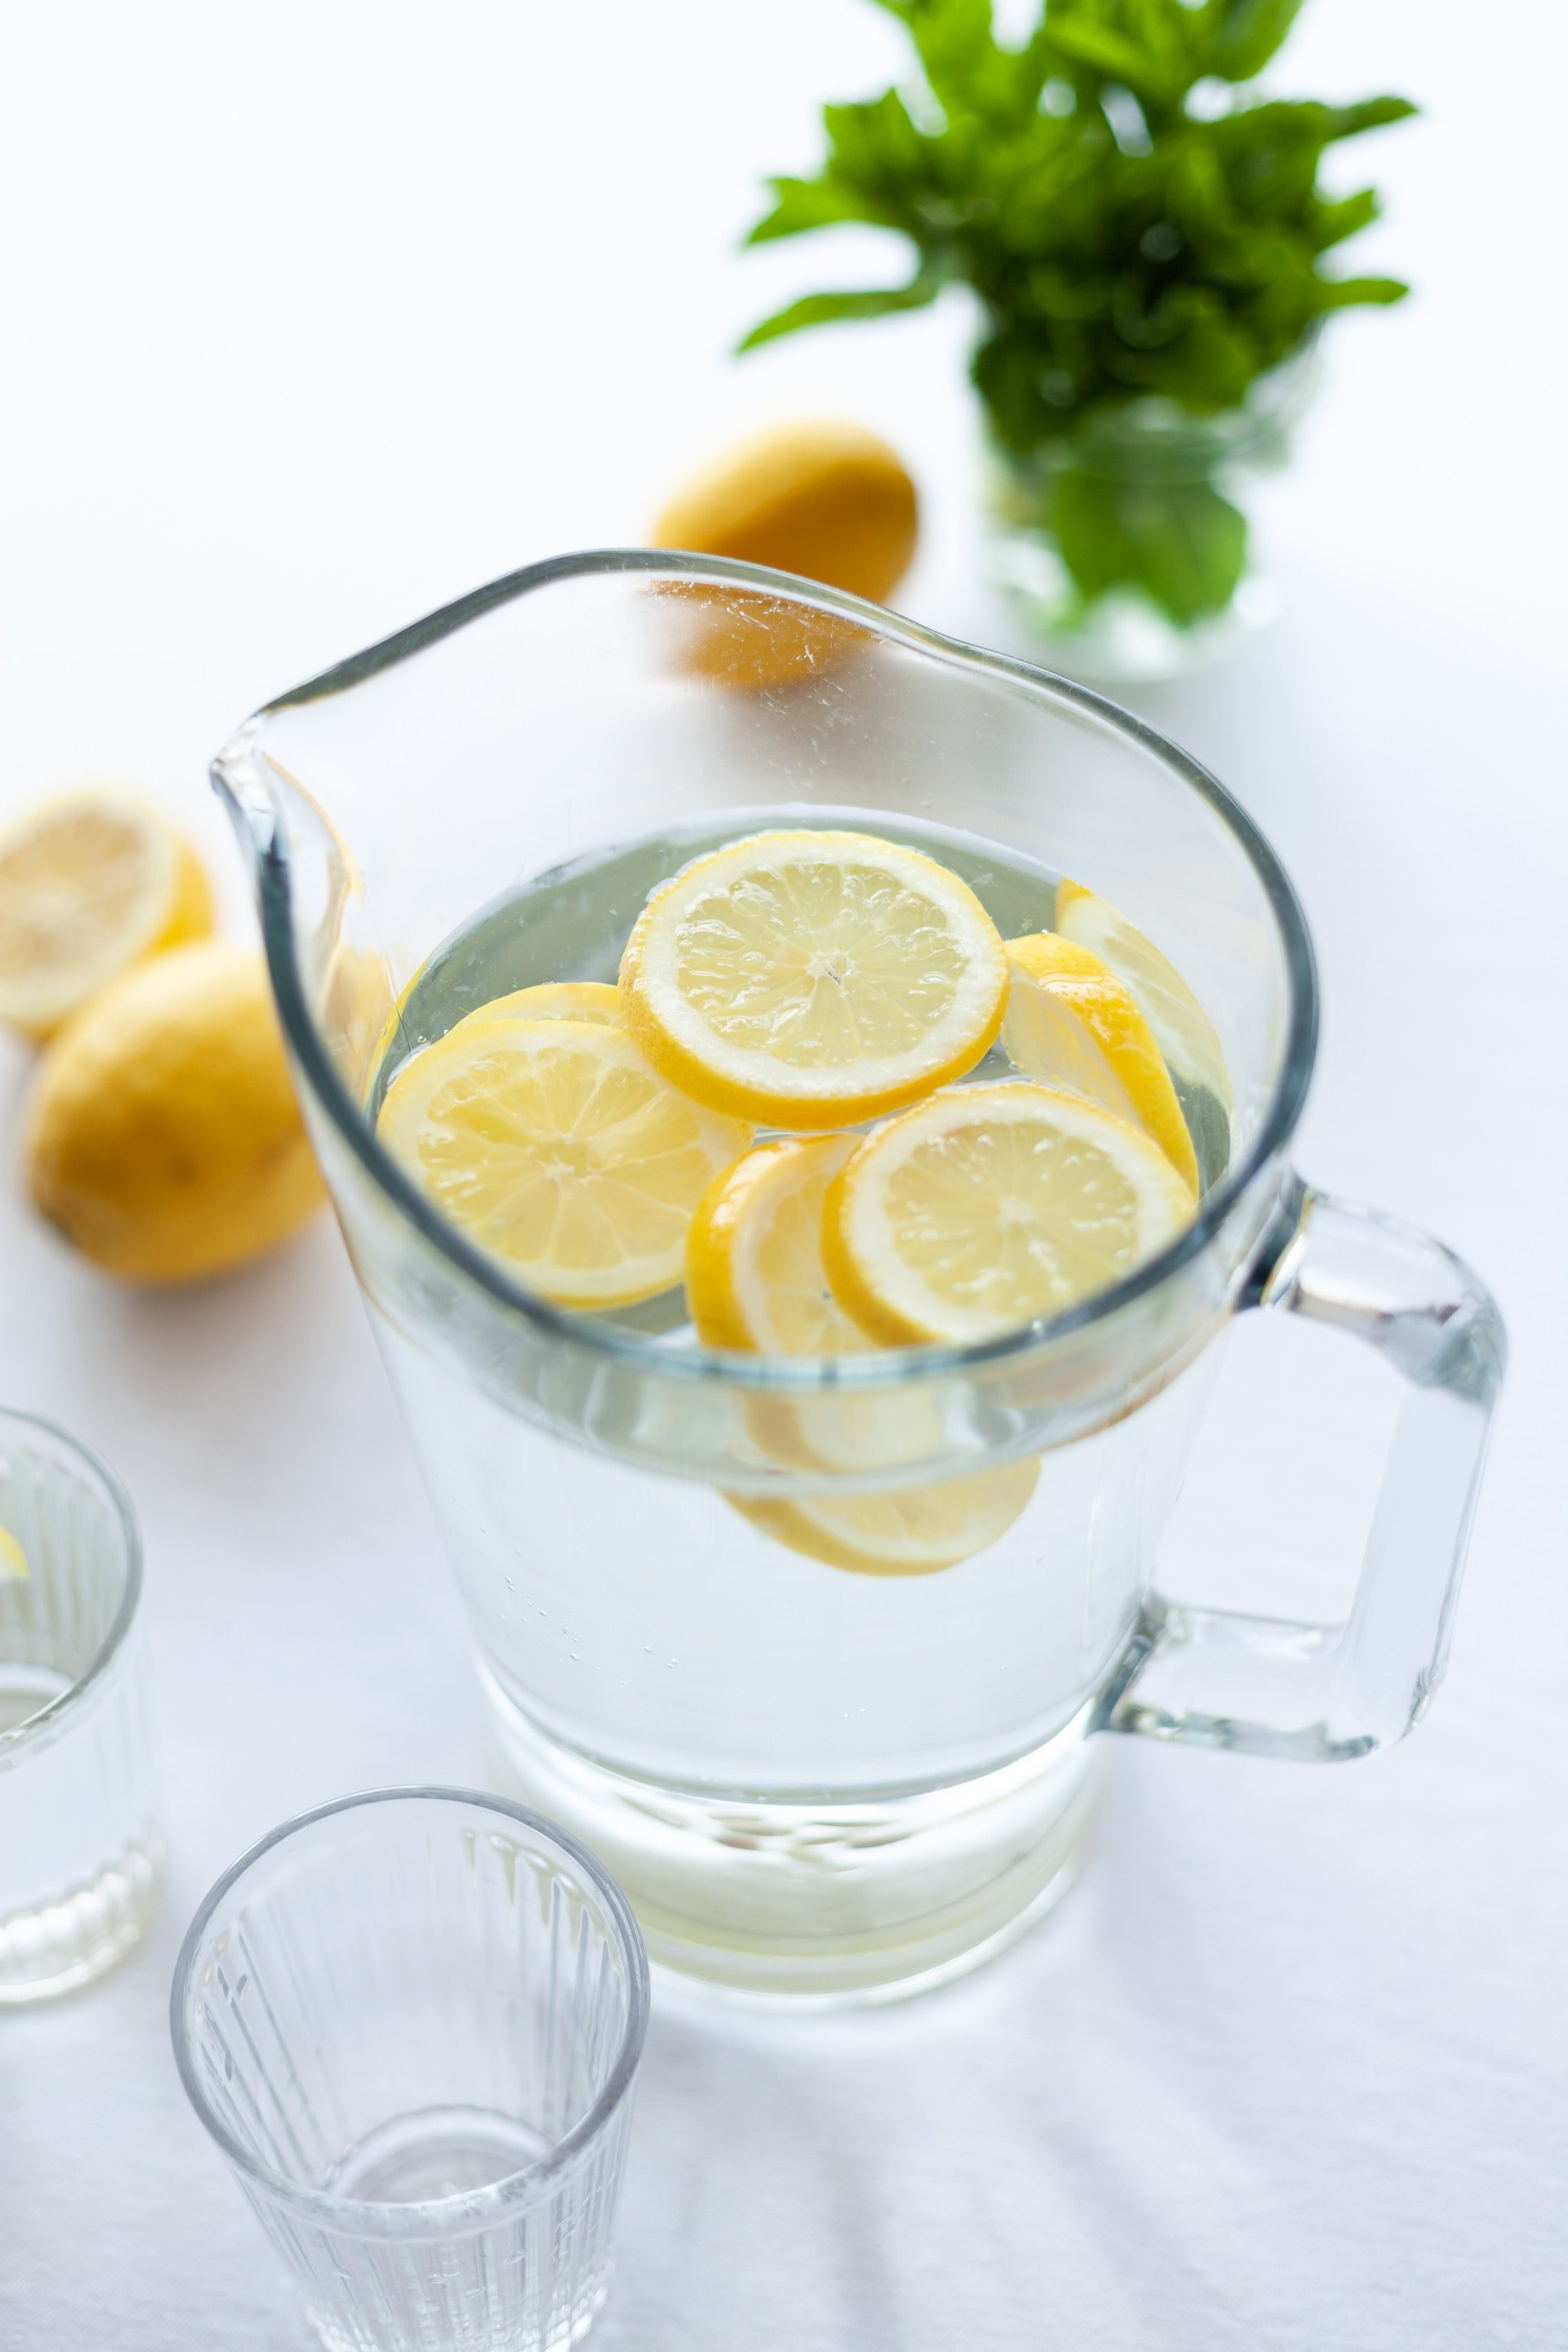 Jug of water with lemon slices